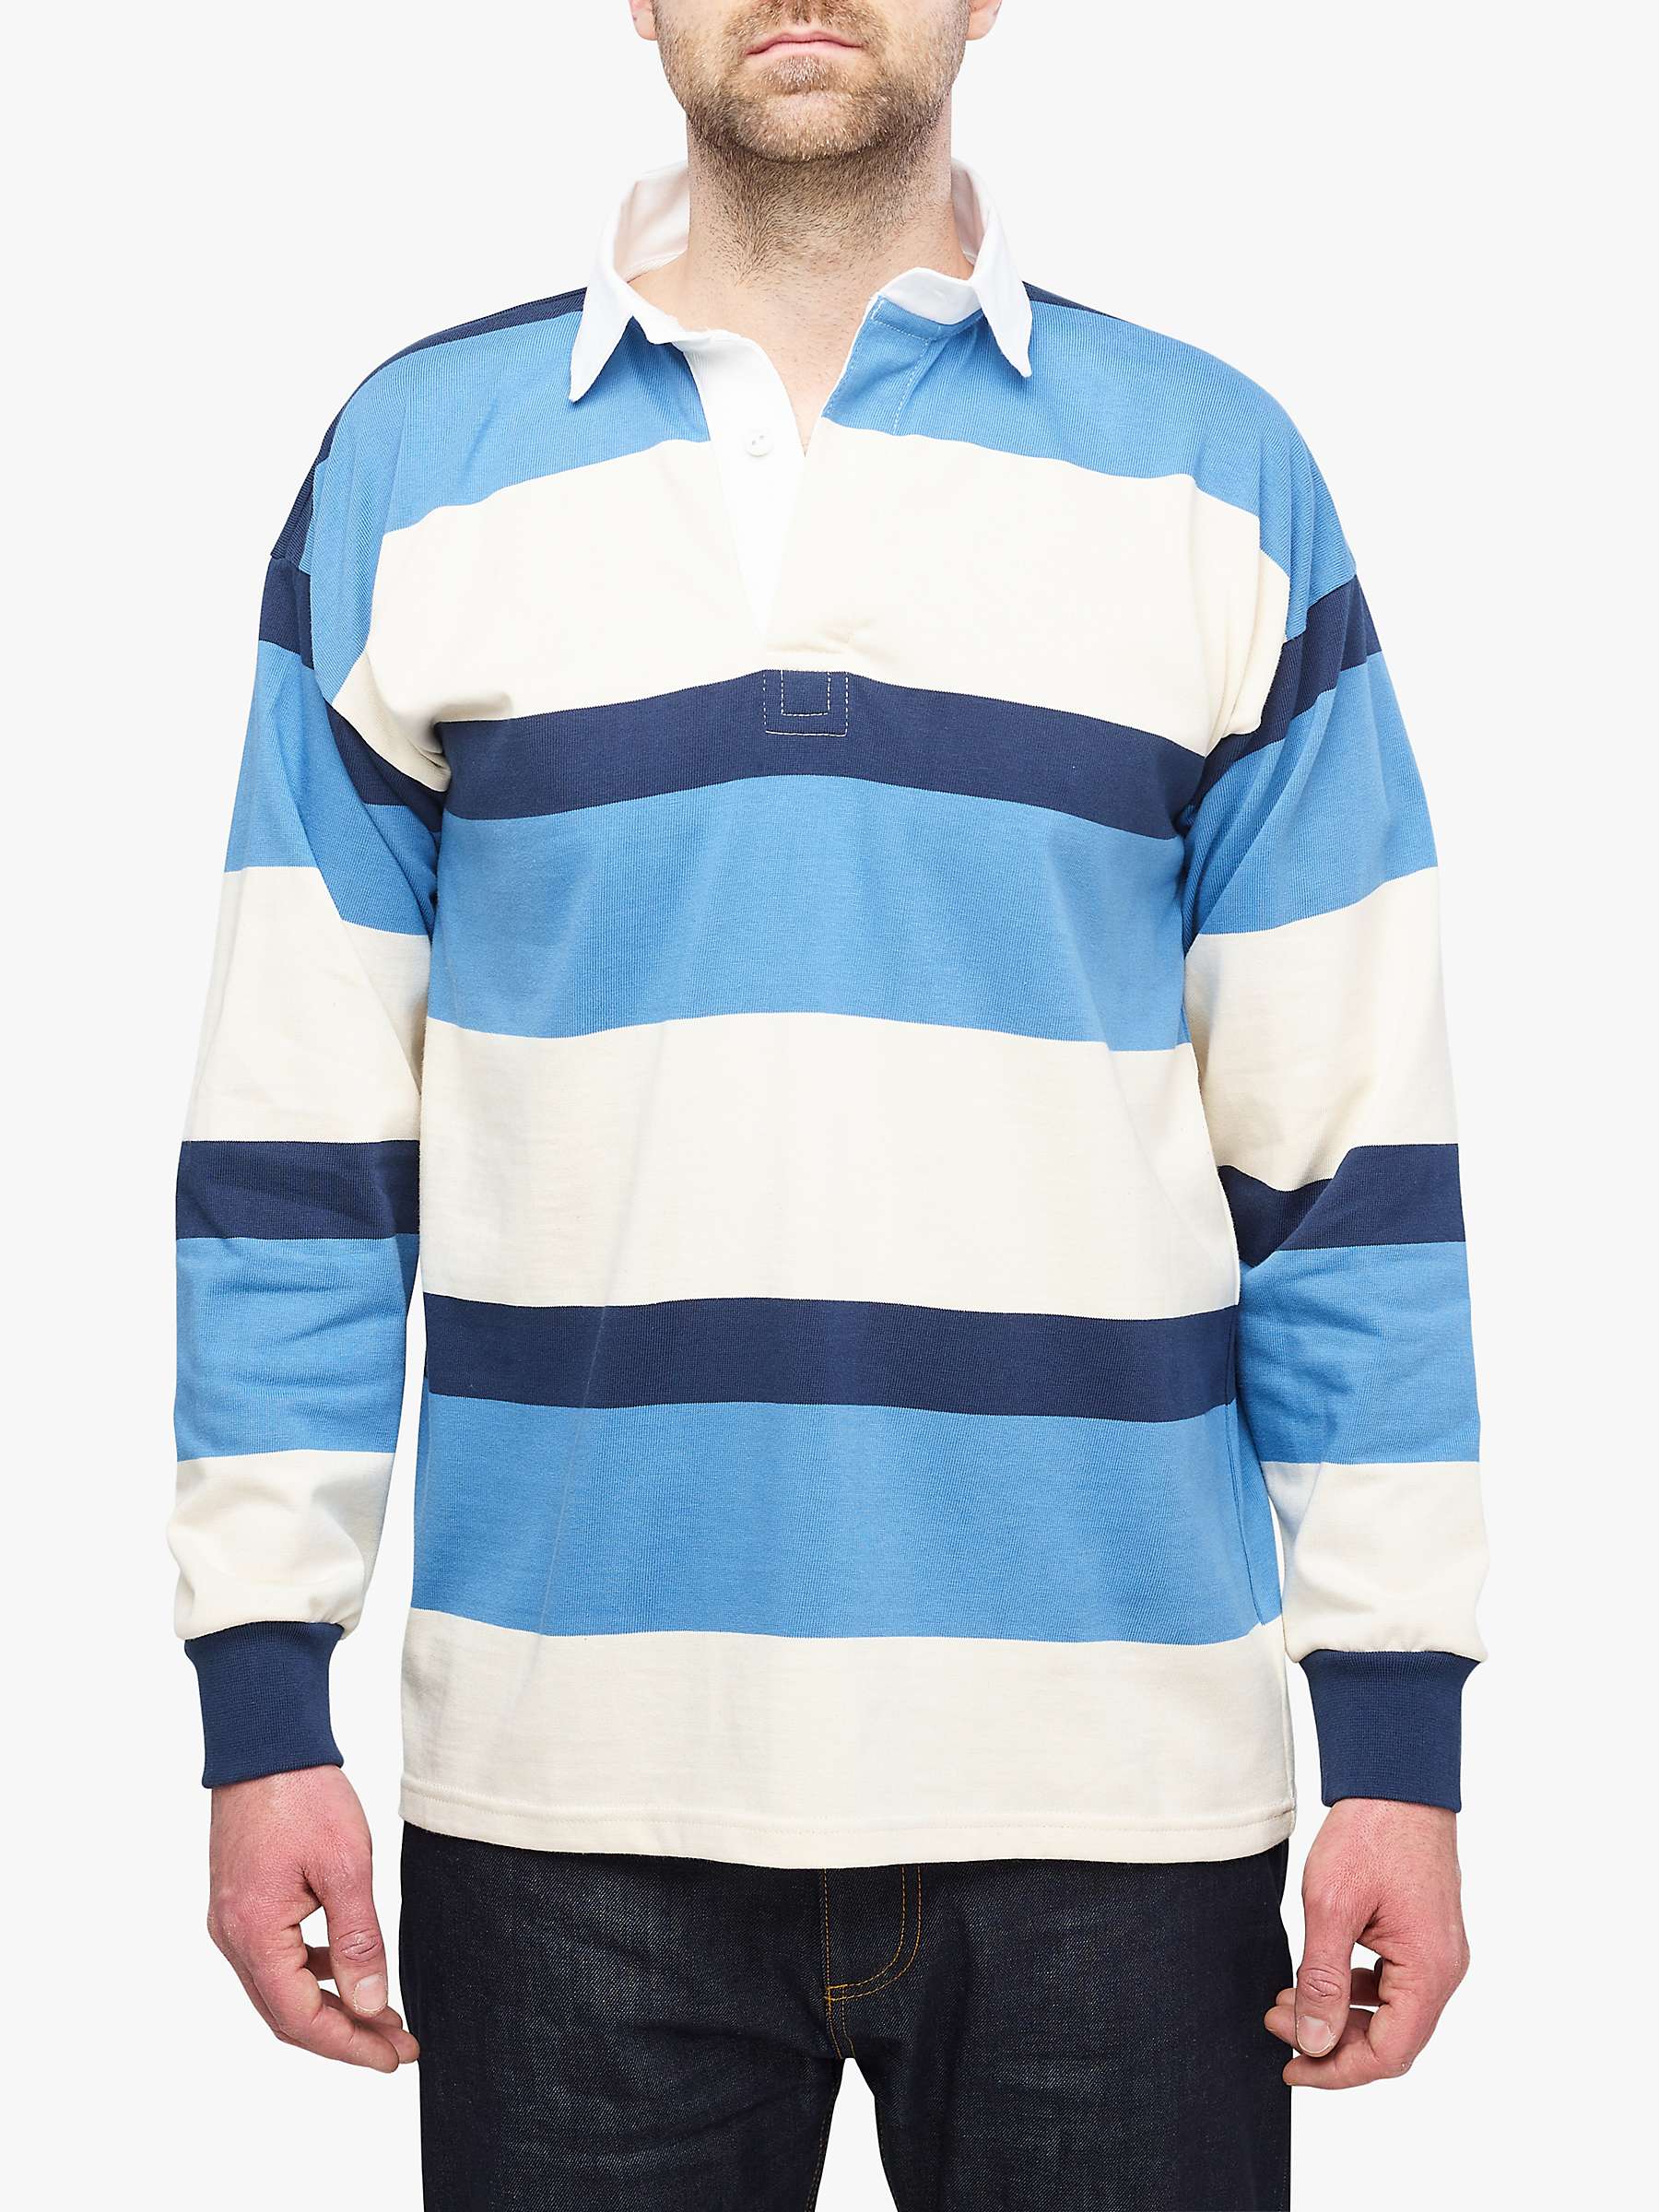 Community Clothing Stripe Rugby Shirt, Navy And Green Rugby Shirt